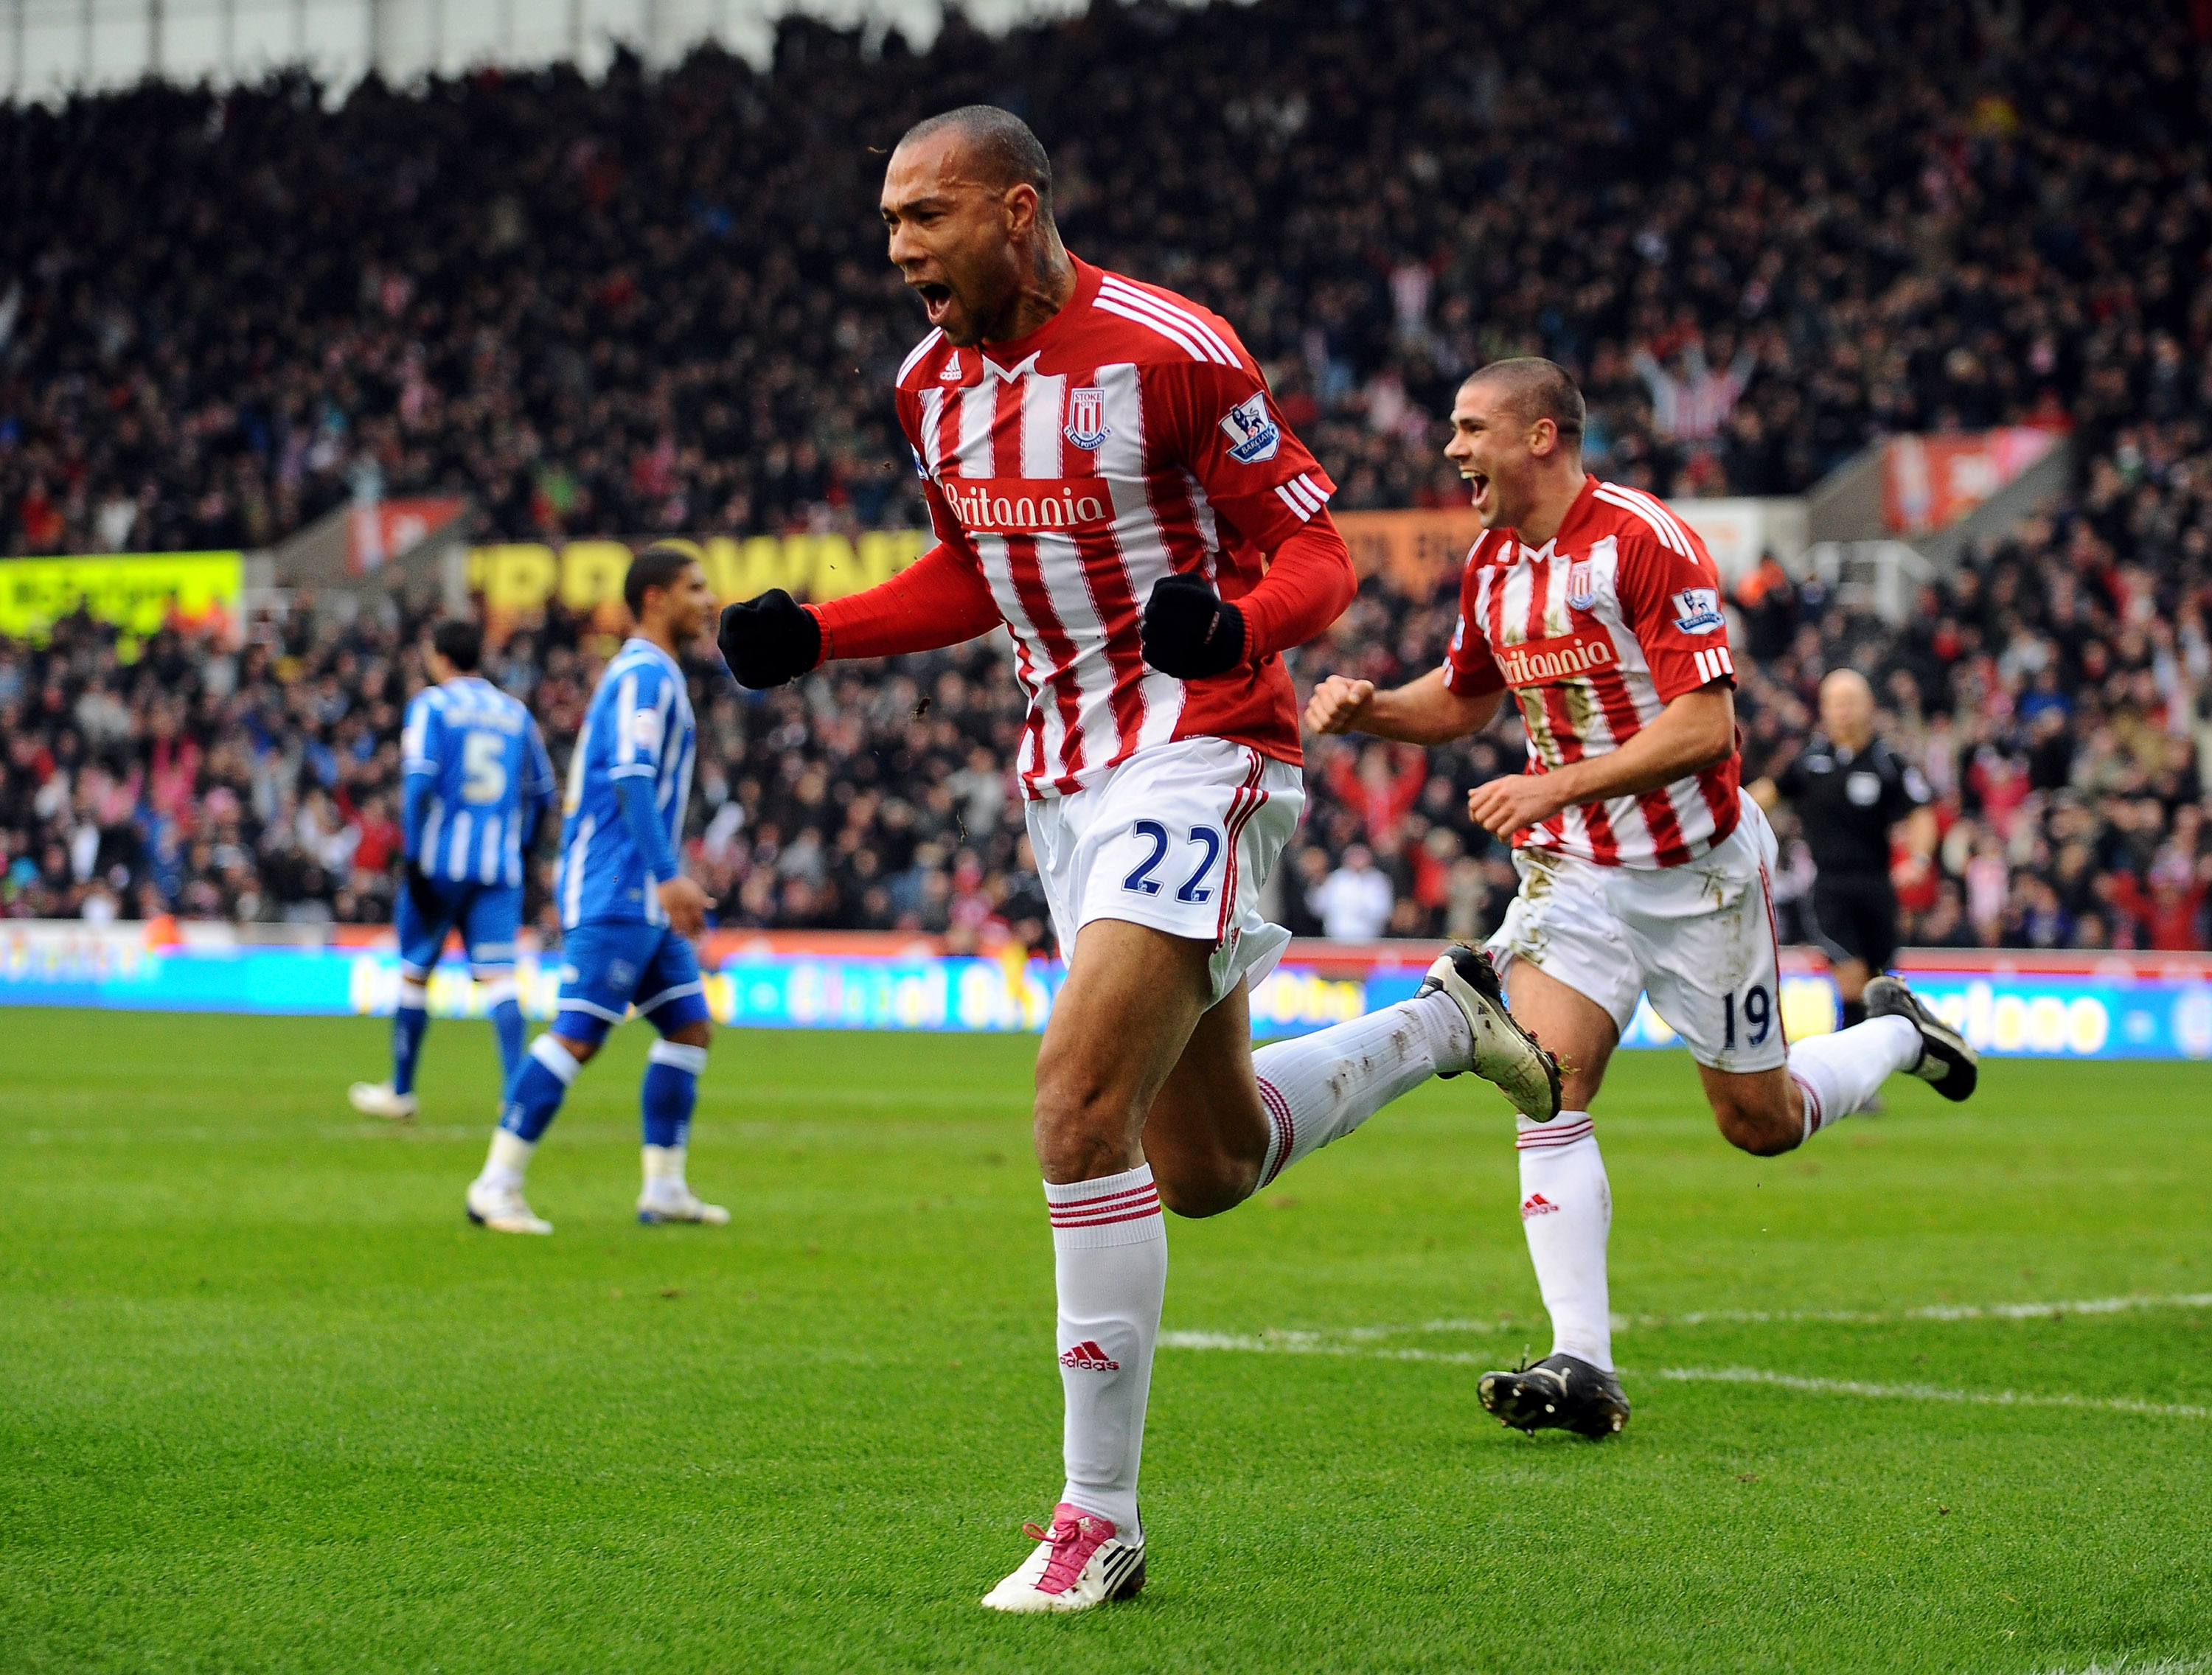 STOKE ON TRENT, ENGLAND - FEBRUARY 19:  John Carew (L) of Stoke celebrates with teammate Jonathan Walters after scoring the opening goal during the FA Cup sponsored by E.ON 5th Round match between Stoke City and Brighton & Hove Albion at Britannia Stadium